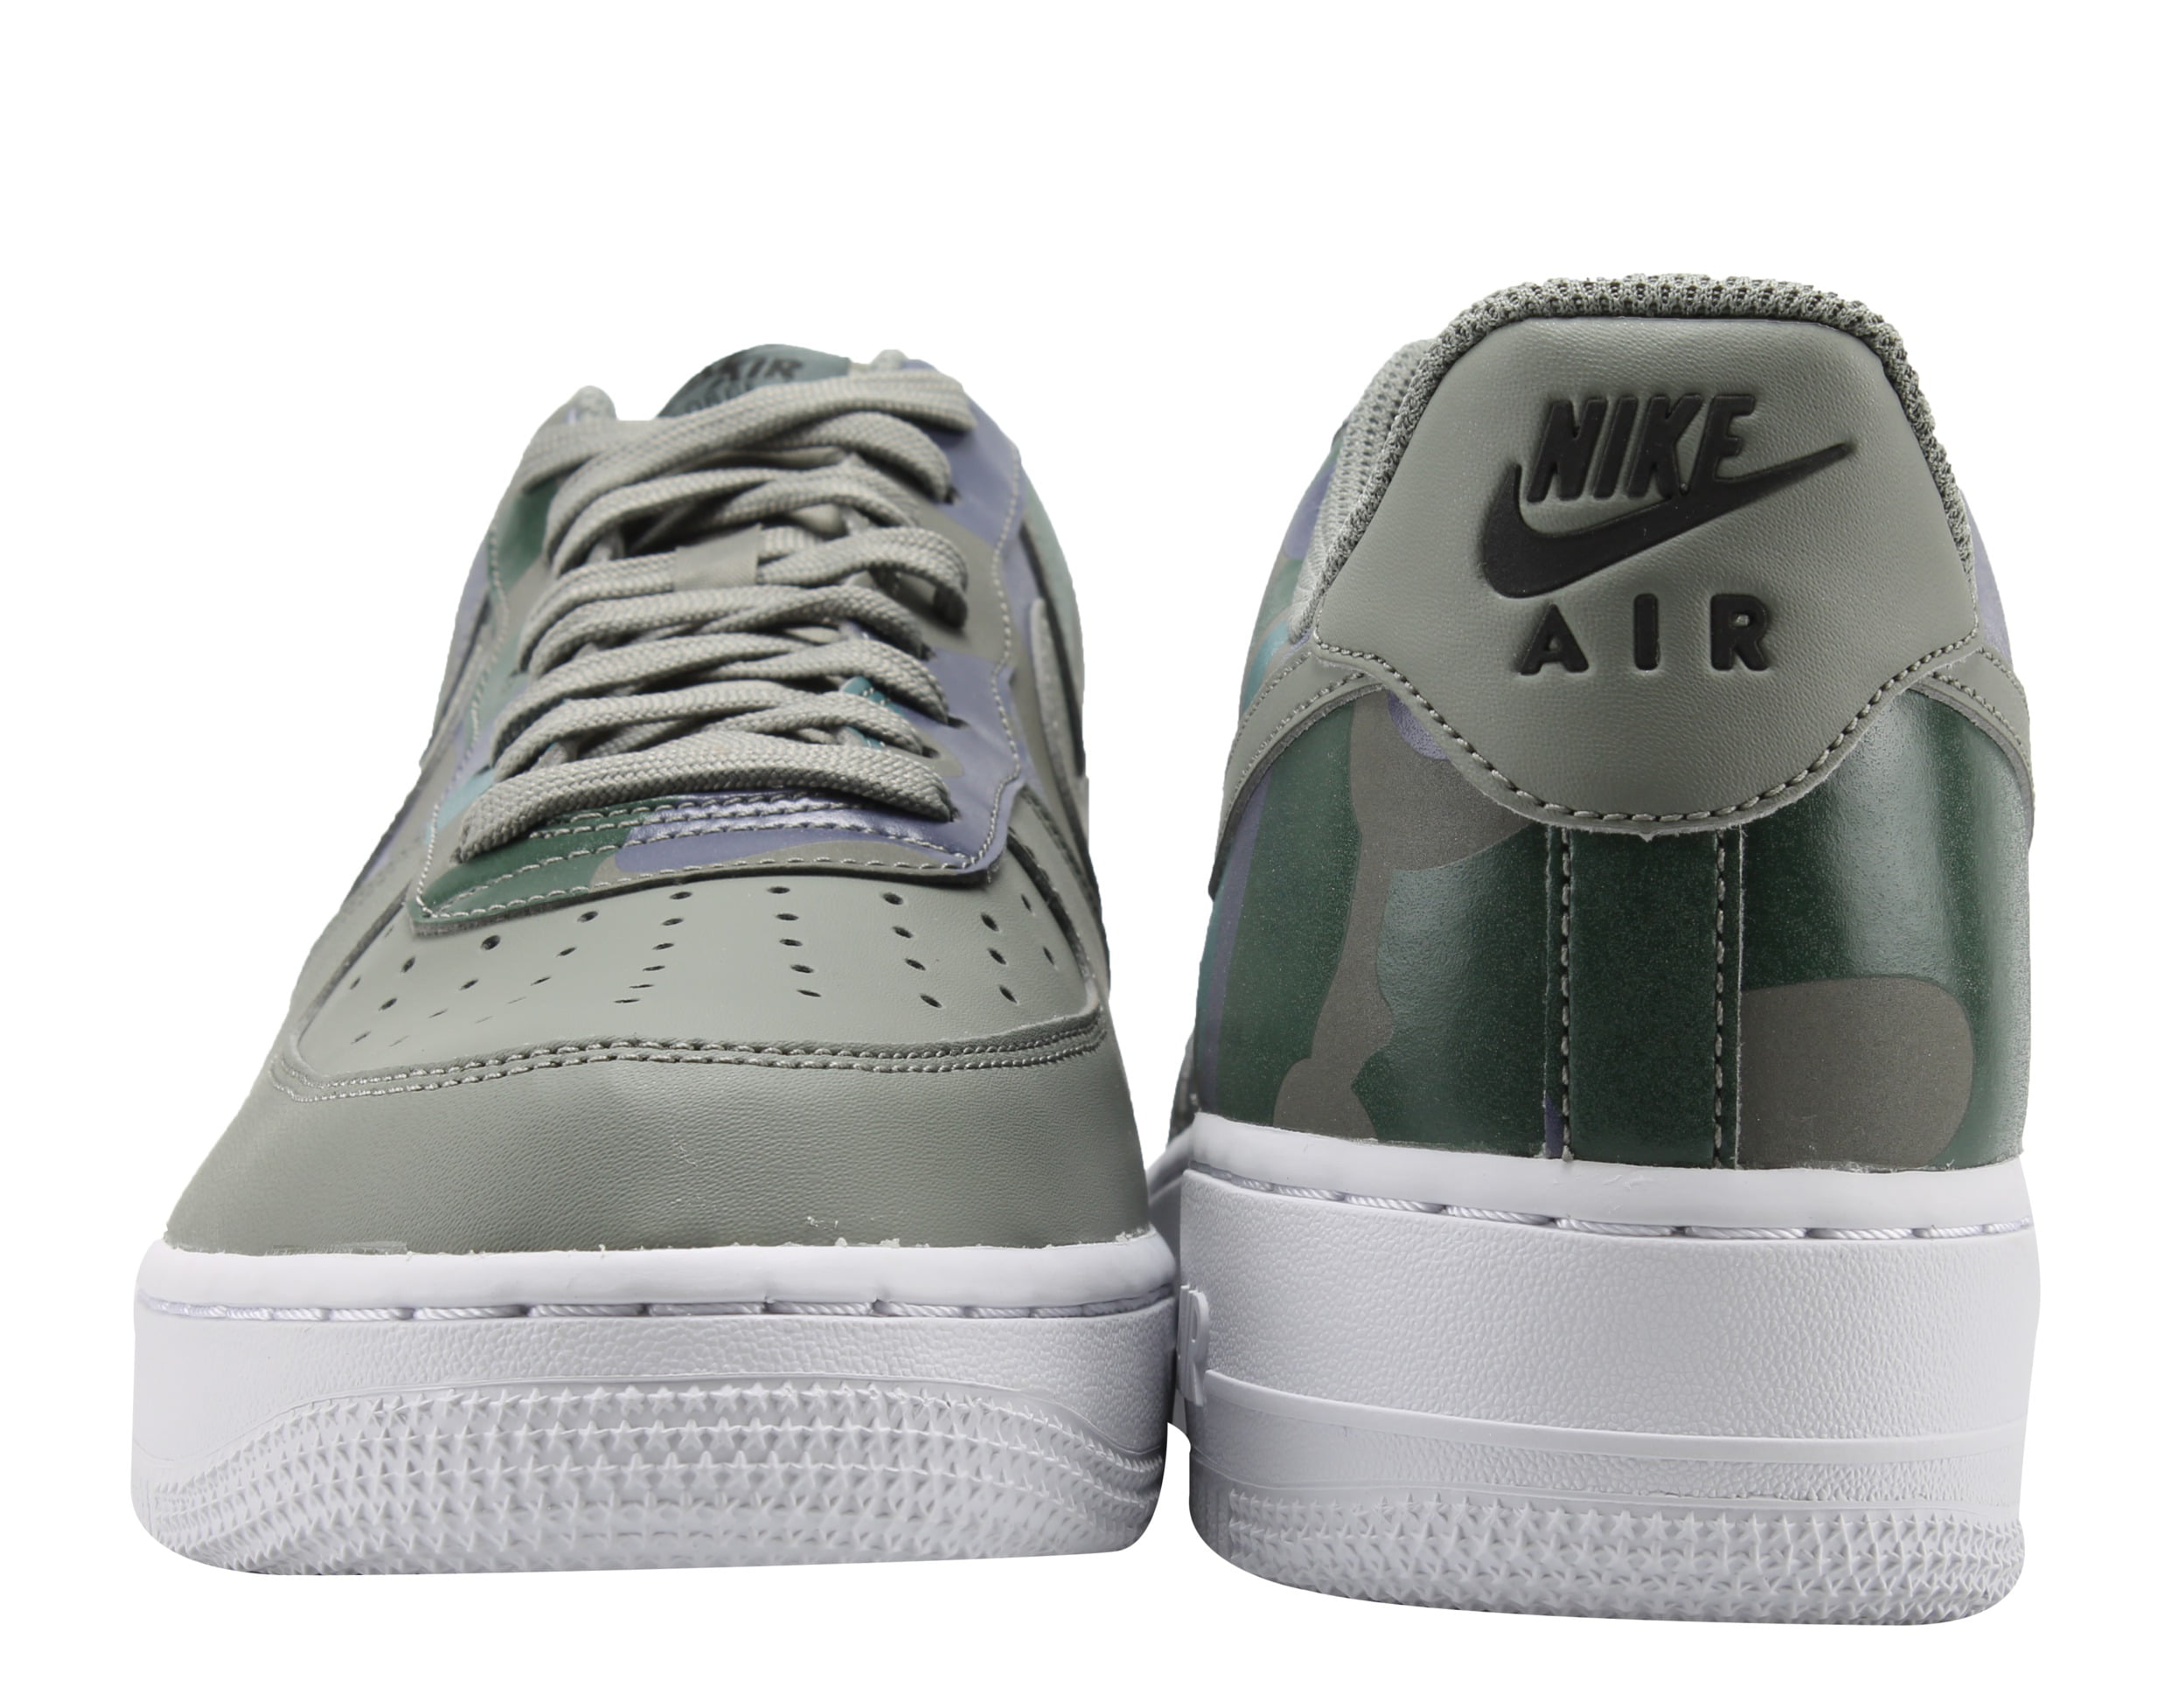 Nike AIR Force 1 LV8 UV (GS) Boys Basketball-Shoes AO2286-700_6Y - Volt/Volt-White-White  : Buy Online at Best Price in KSA - Souq is now : Fashion